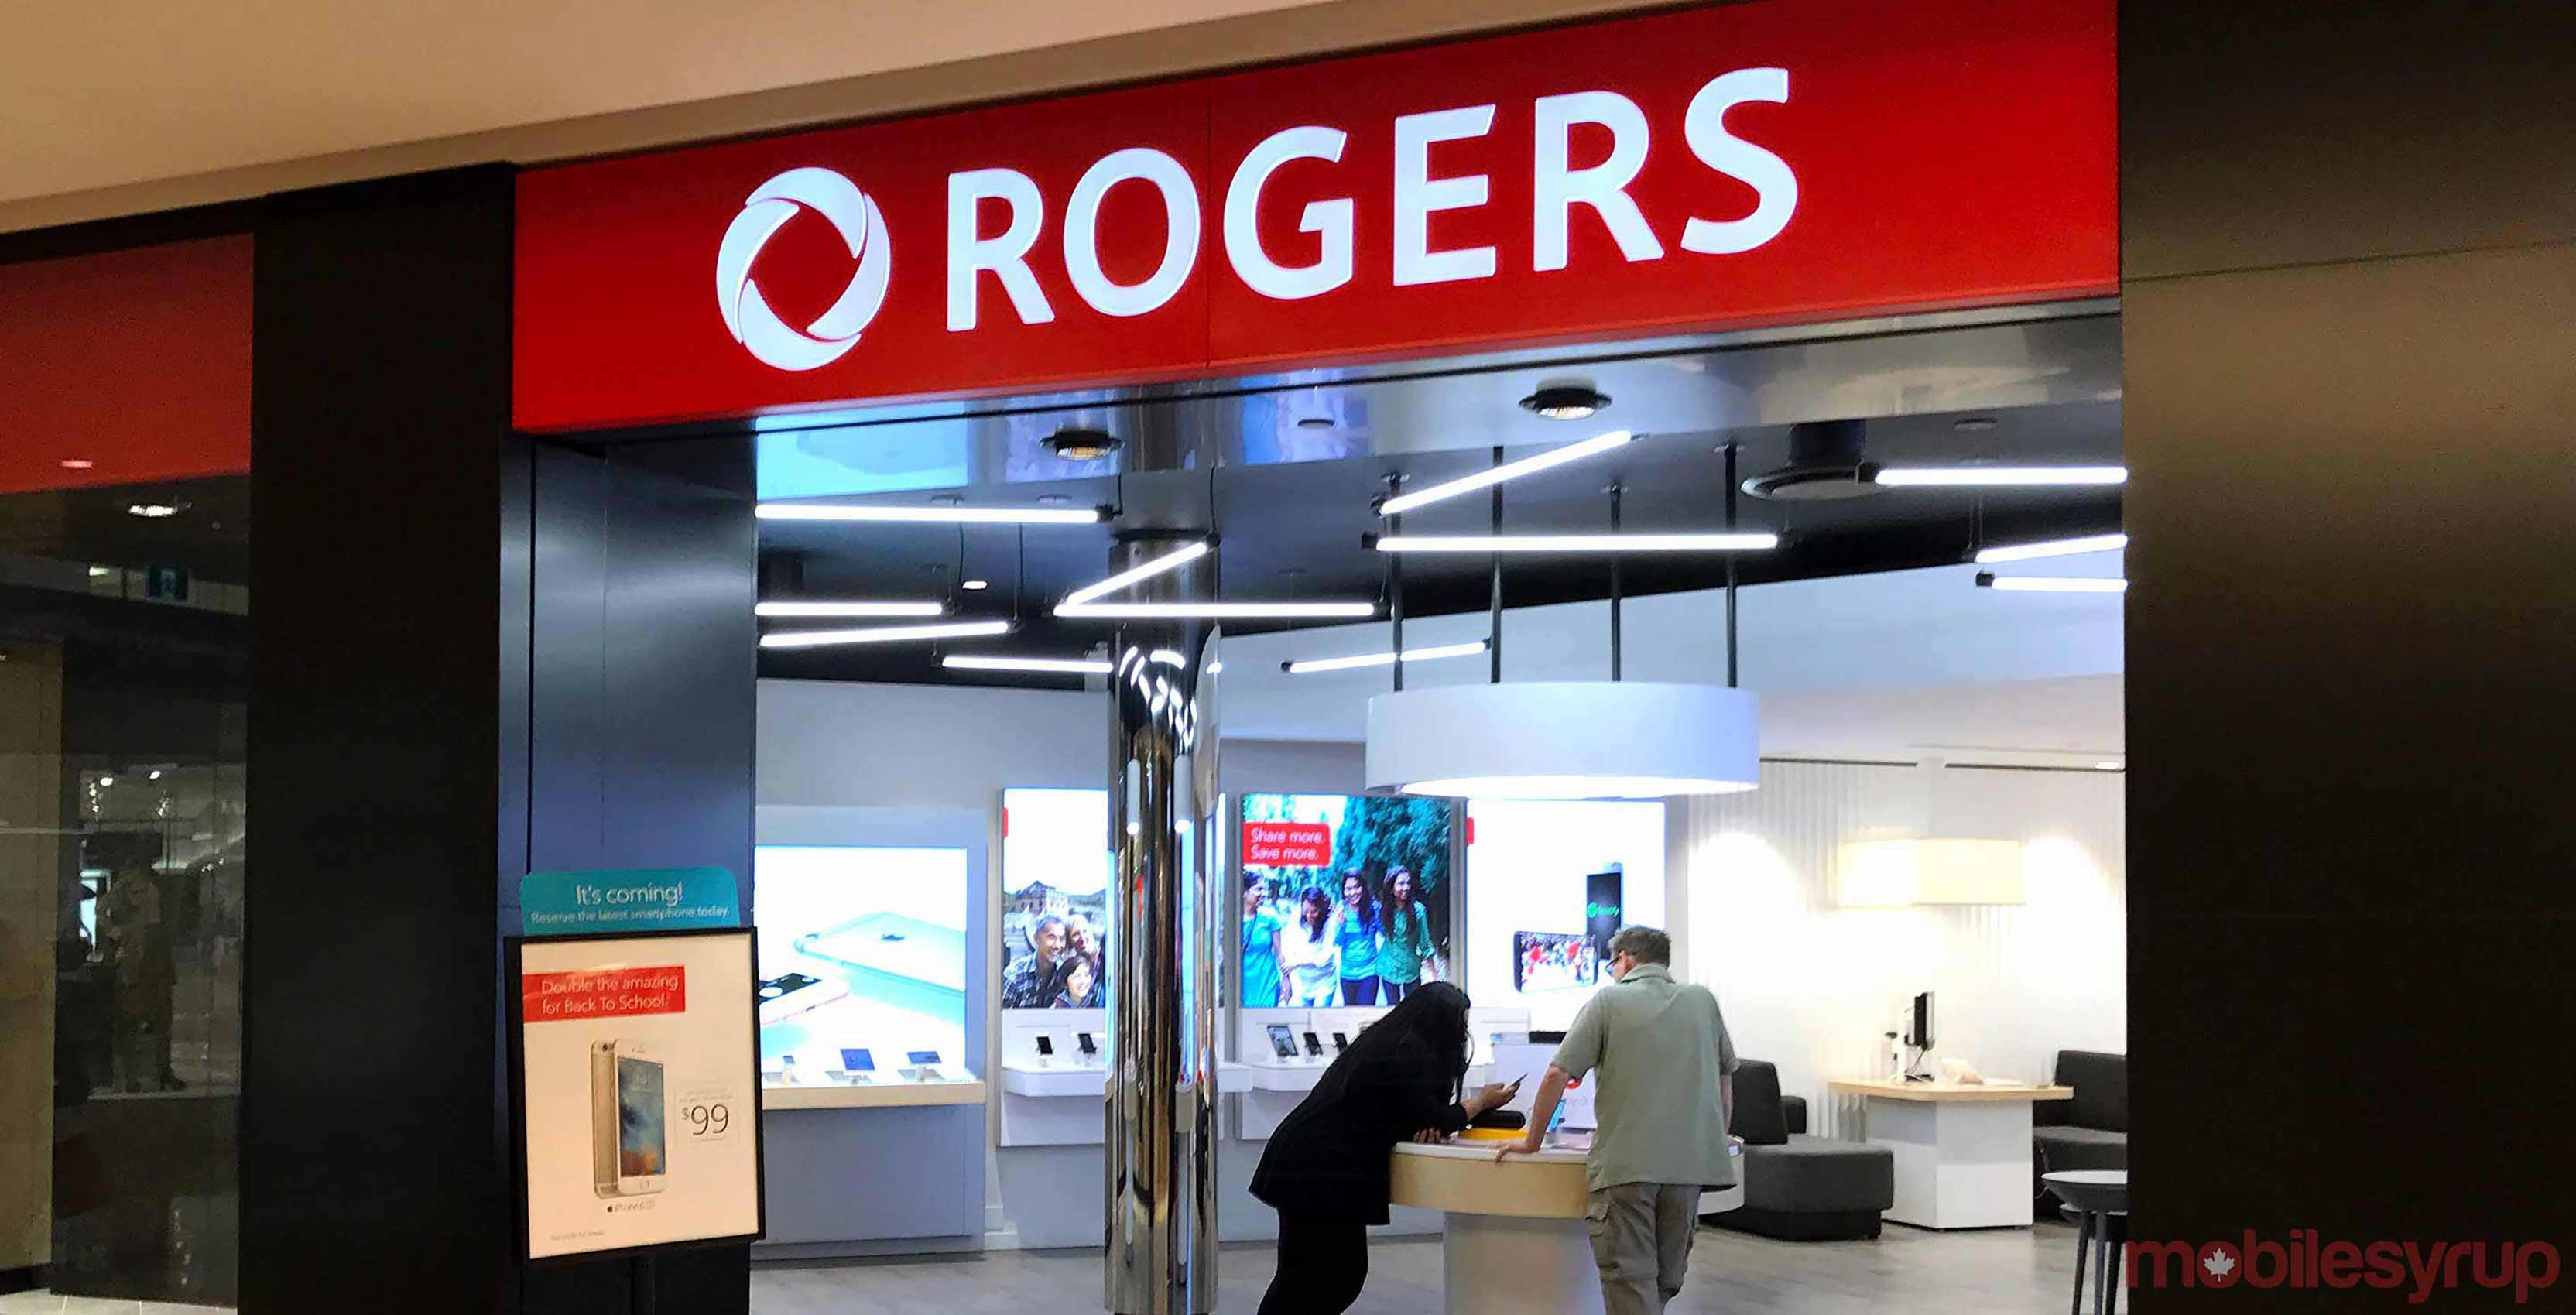 Rogers storefront